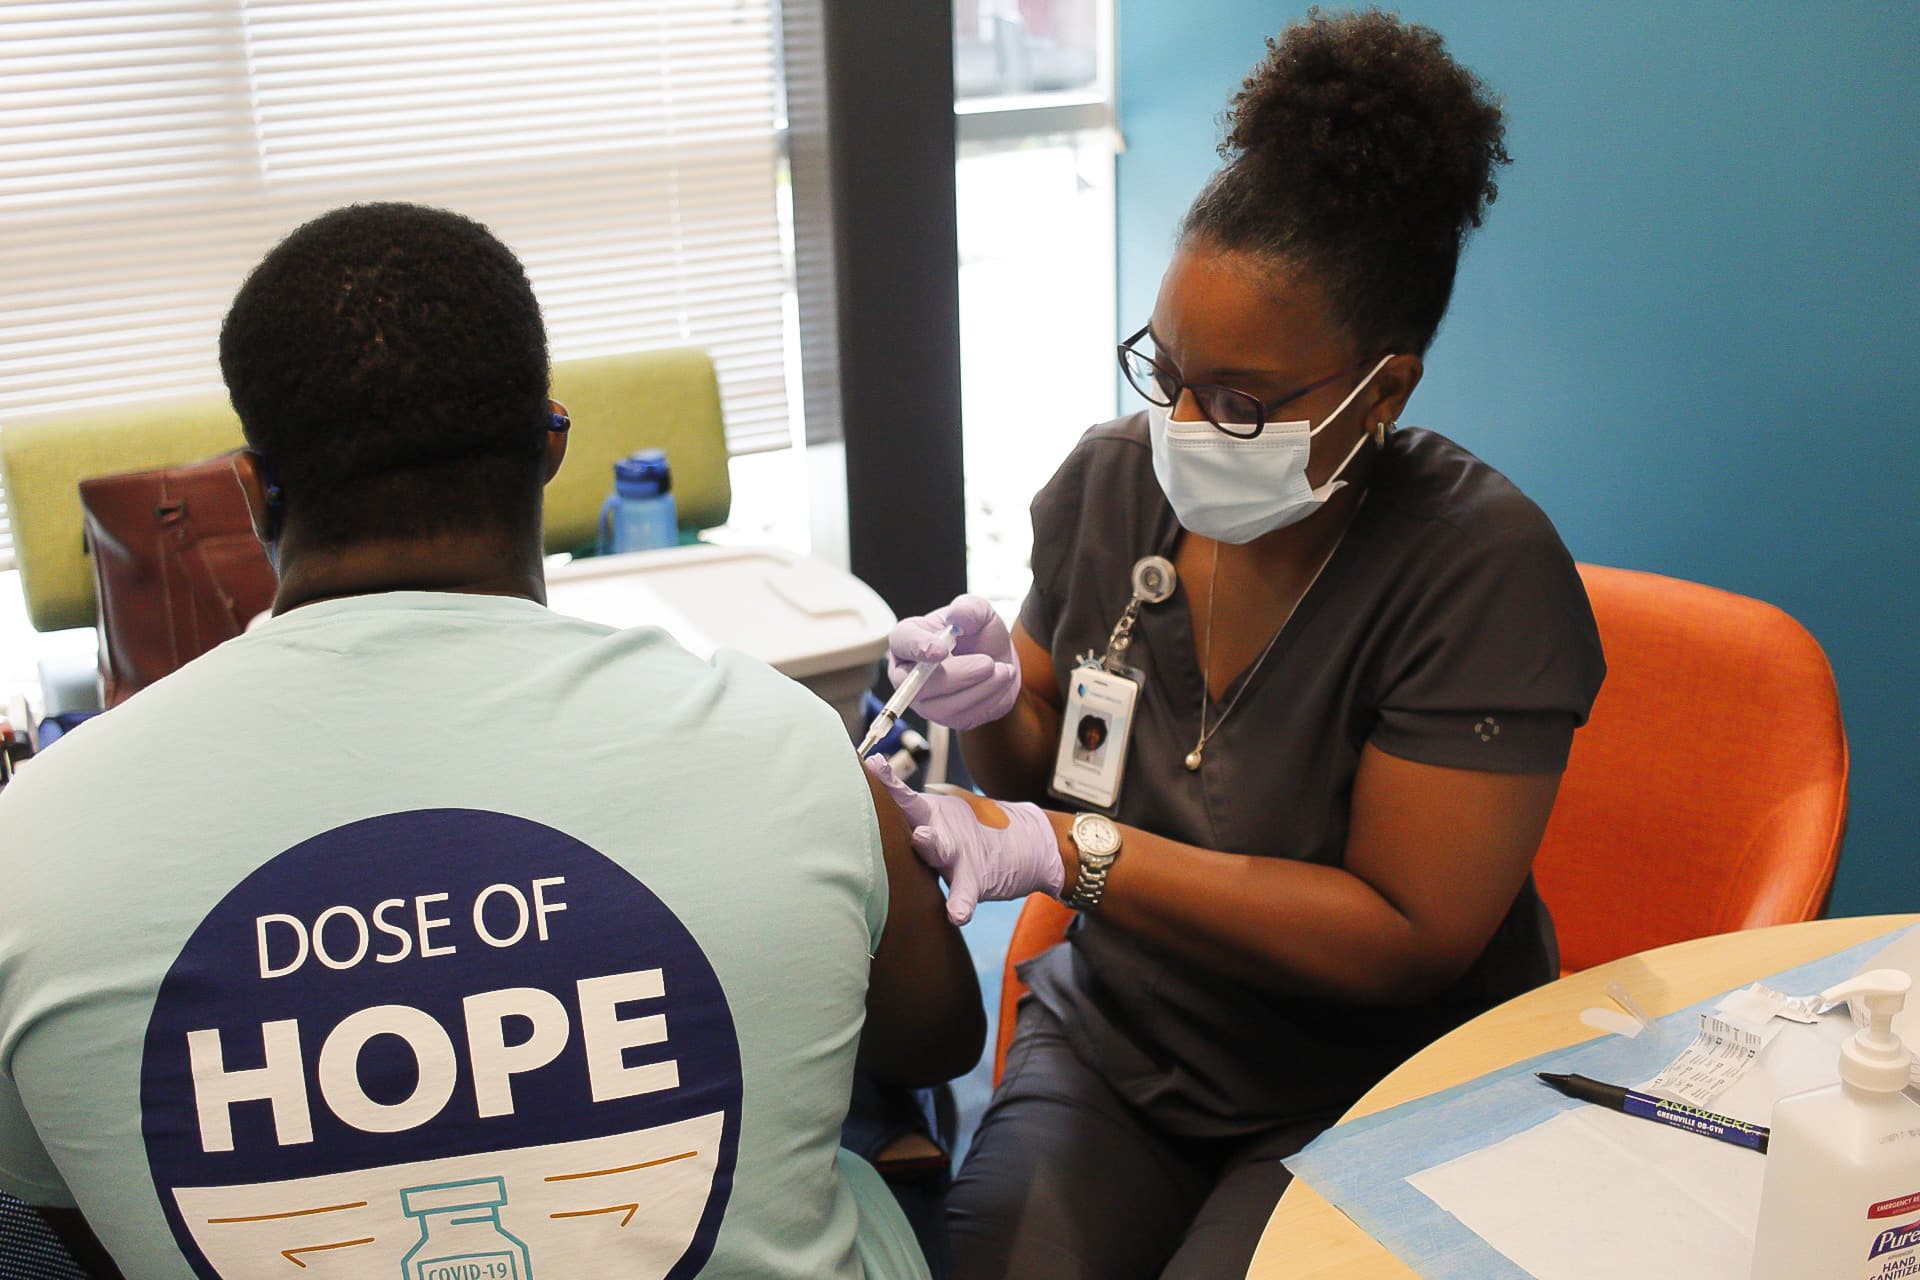 A Vidant nurse administers a COVID-19 vaccine during a Pop-up Community Health event.